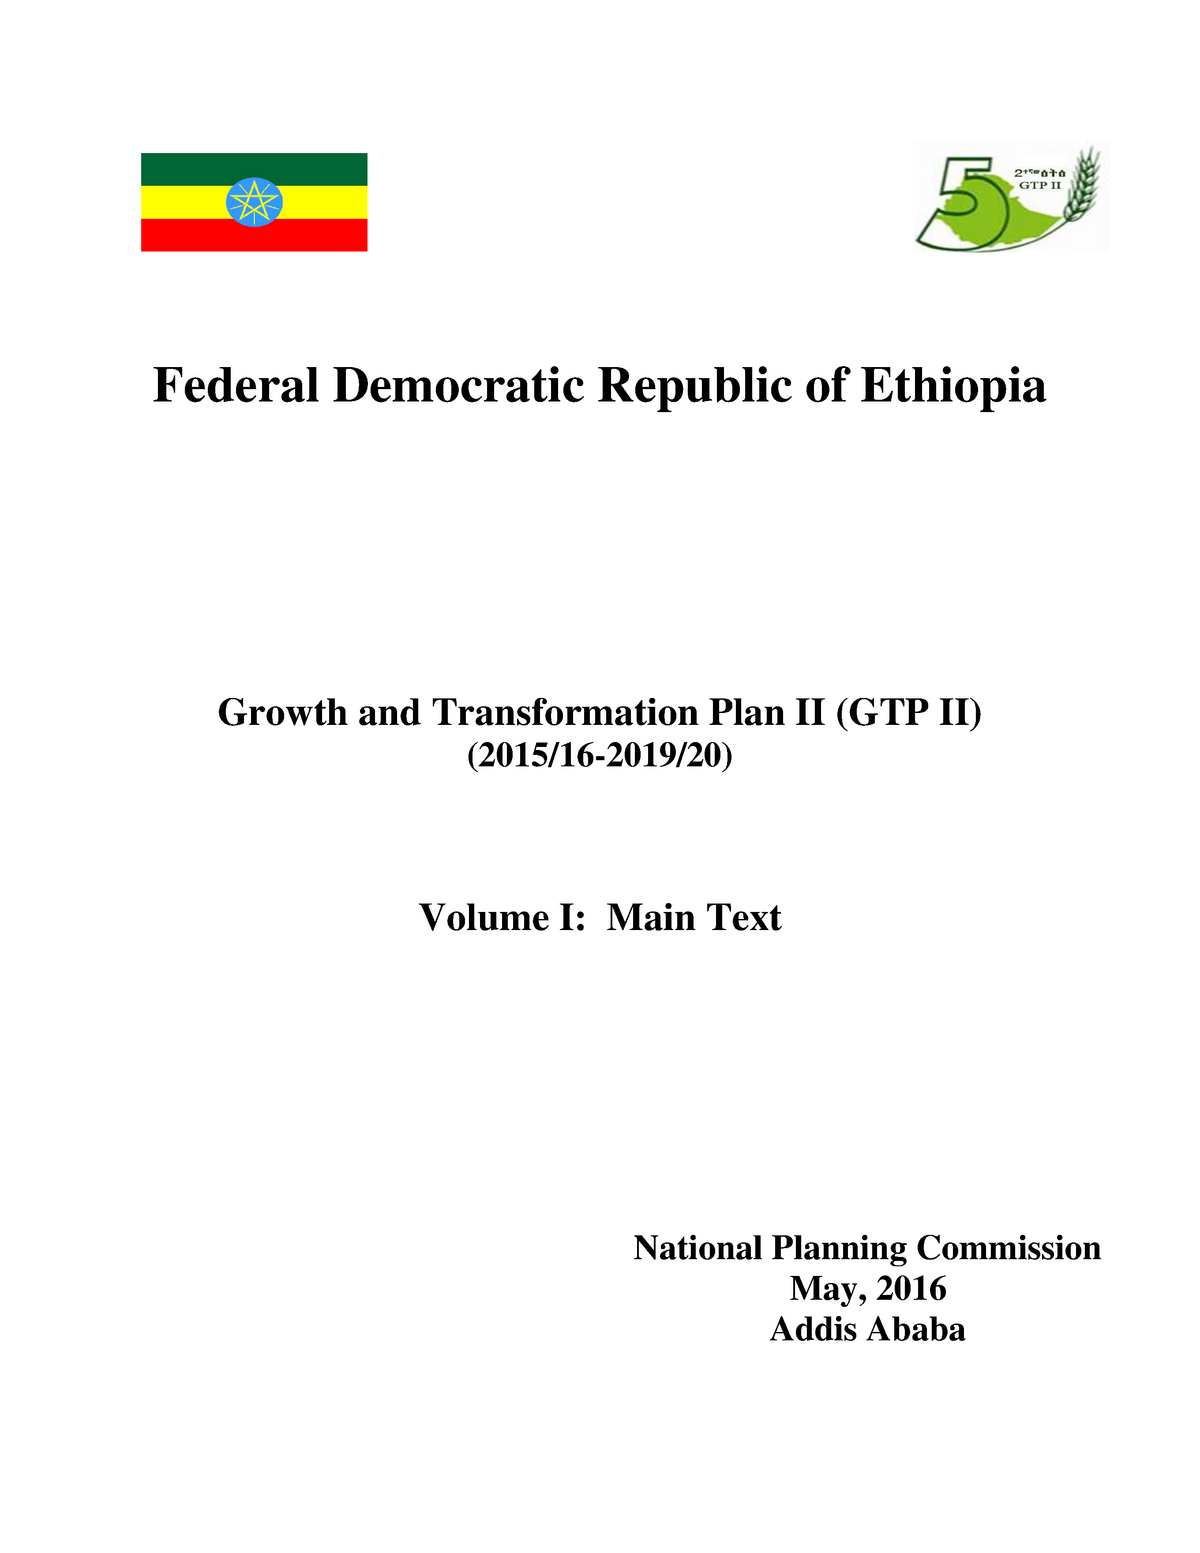 business plan pdf download in ethiopia